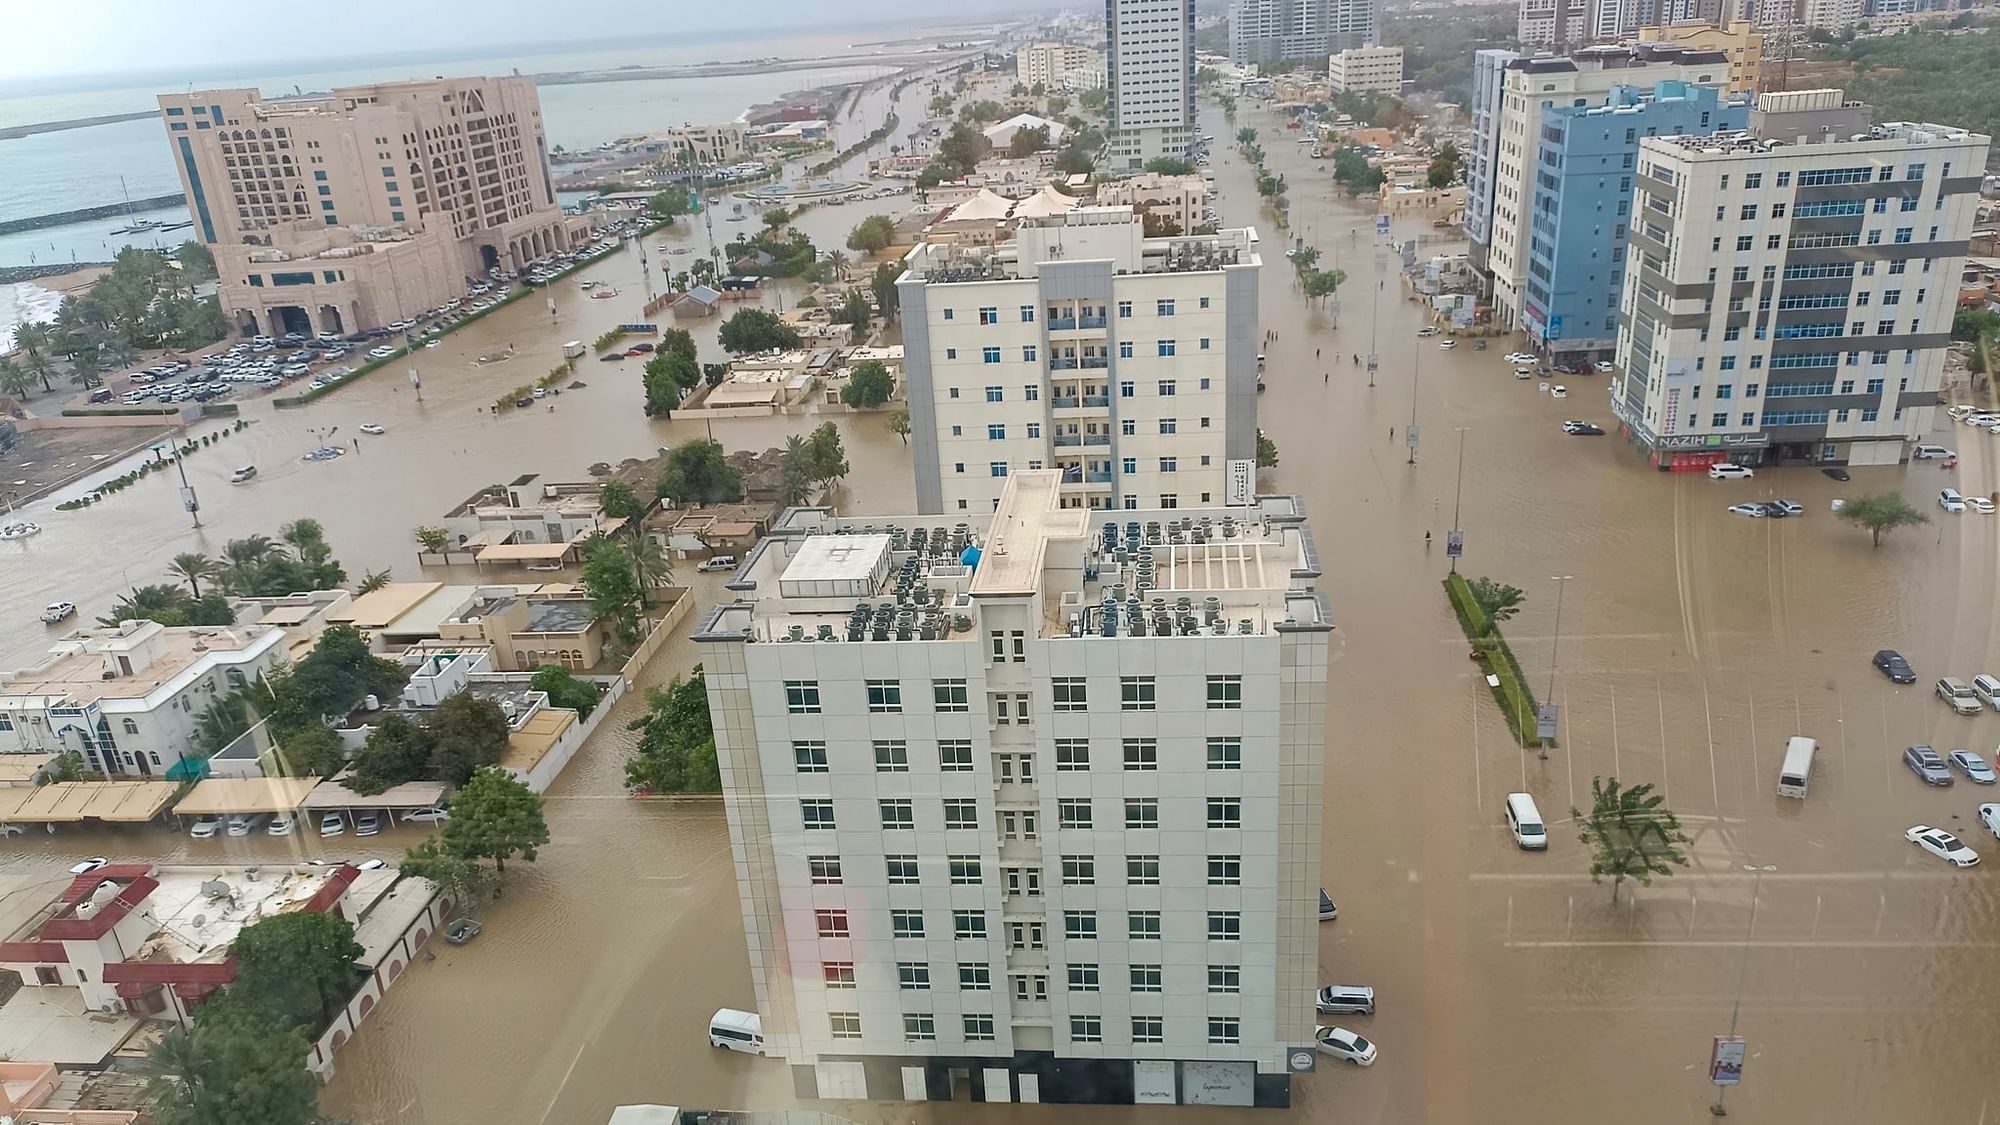 <div class="paragraphs"><p>Over 500 volunteers have registered through the National Volunteering Platform to help residents Fujairah, Dubai which has been affected by heavy flooding, the Ministry of Community Development said on Saturday, 30 July.</p></div>